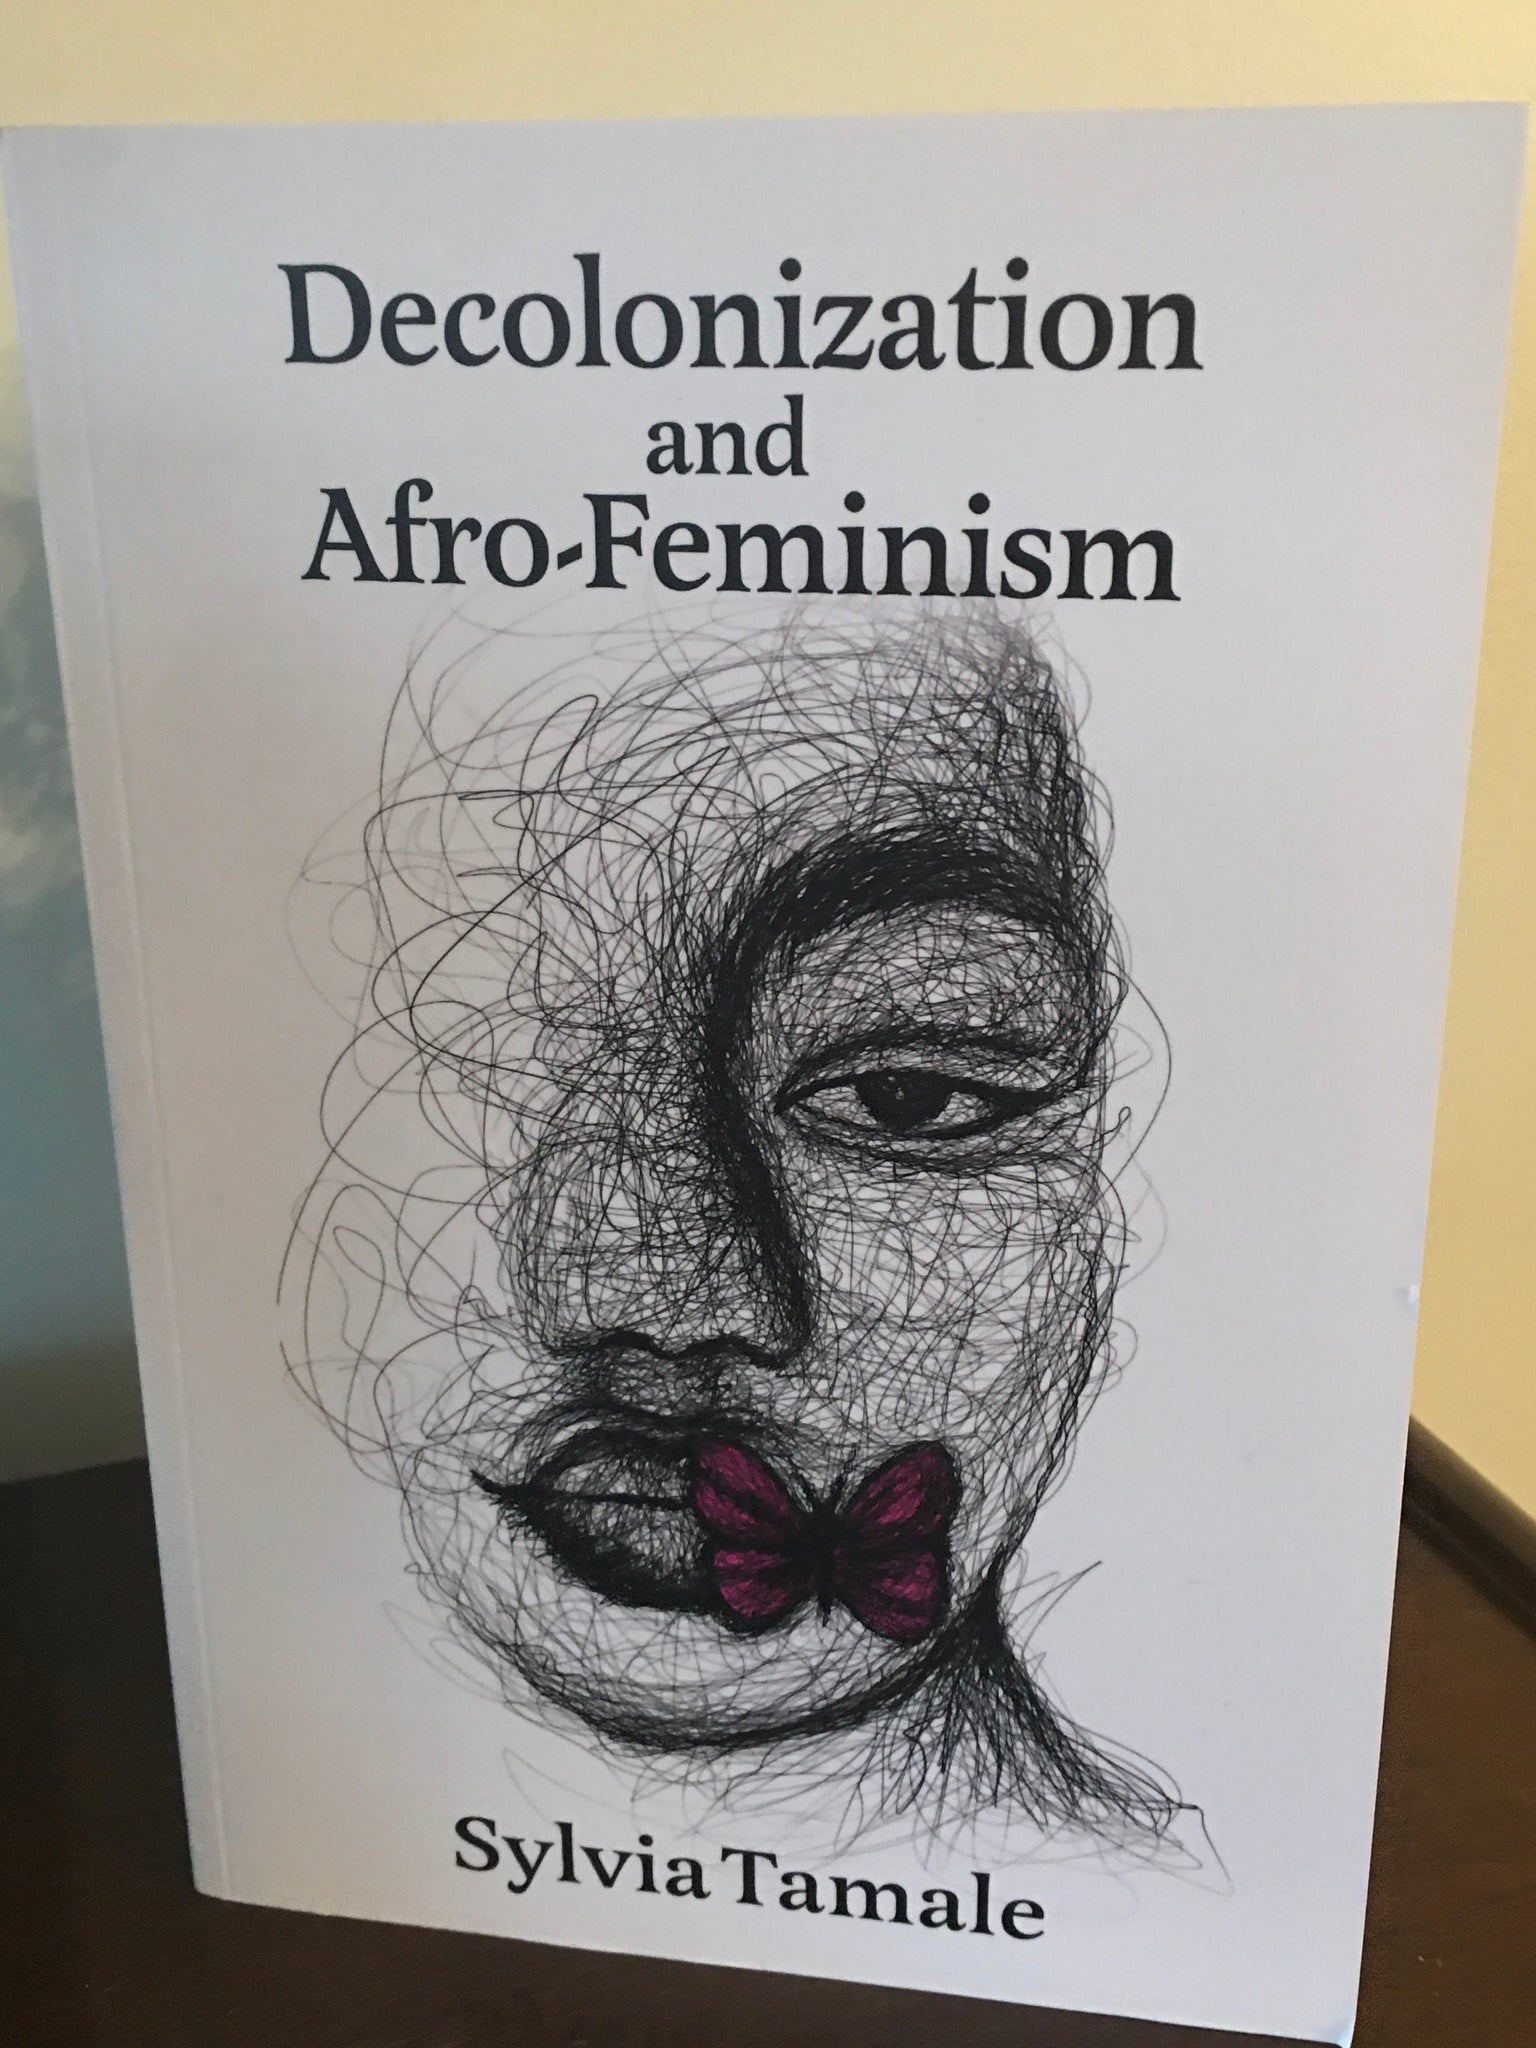 Decolonization and Afro-Feminism